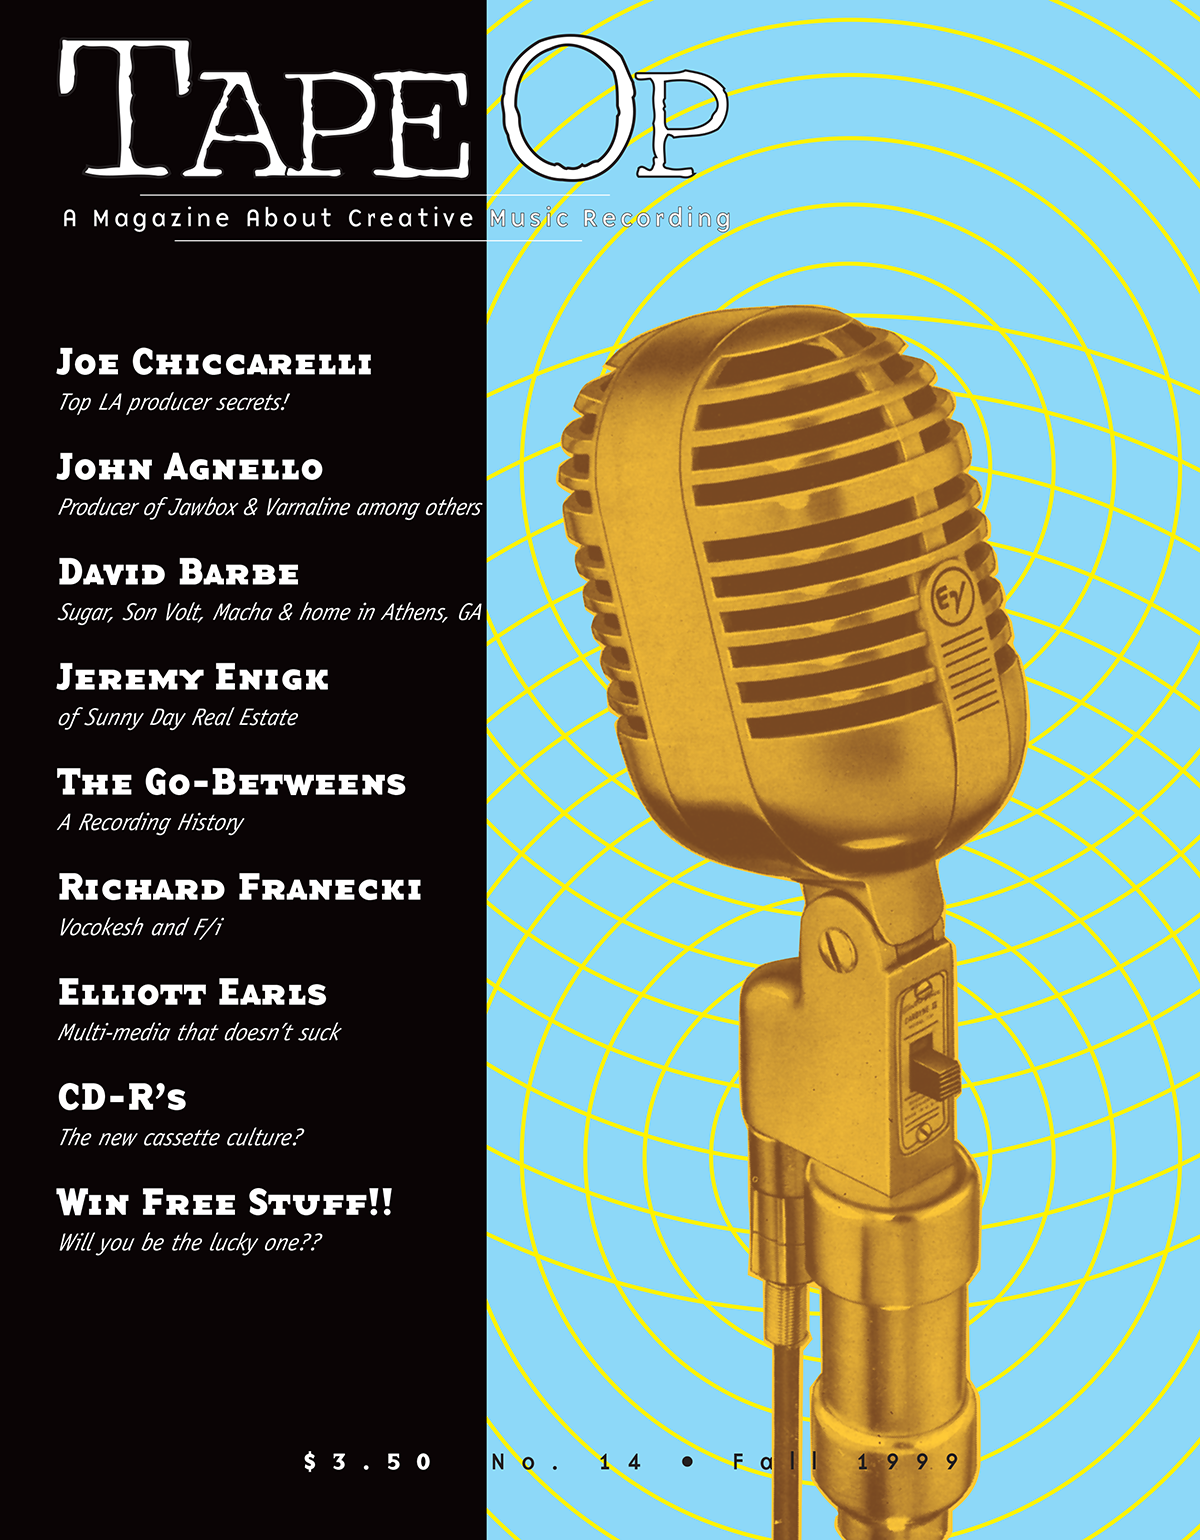 Read Tape Op #14 Tape Op Magazine Longform candid interviews with music producers and audio engineers covering mixing, mastering, recording and music production.